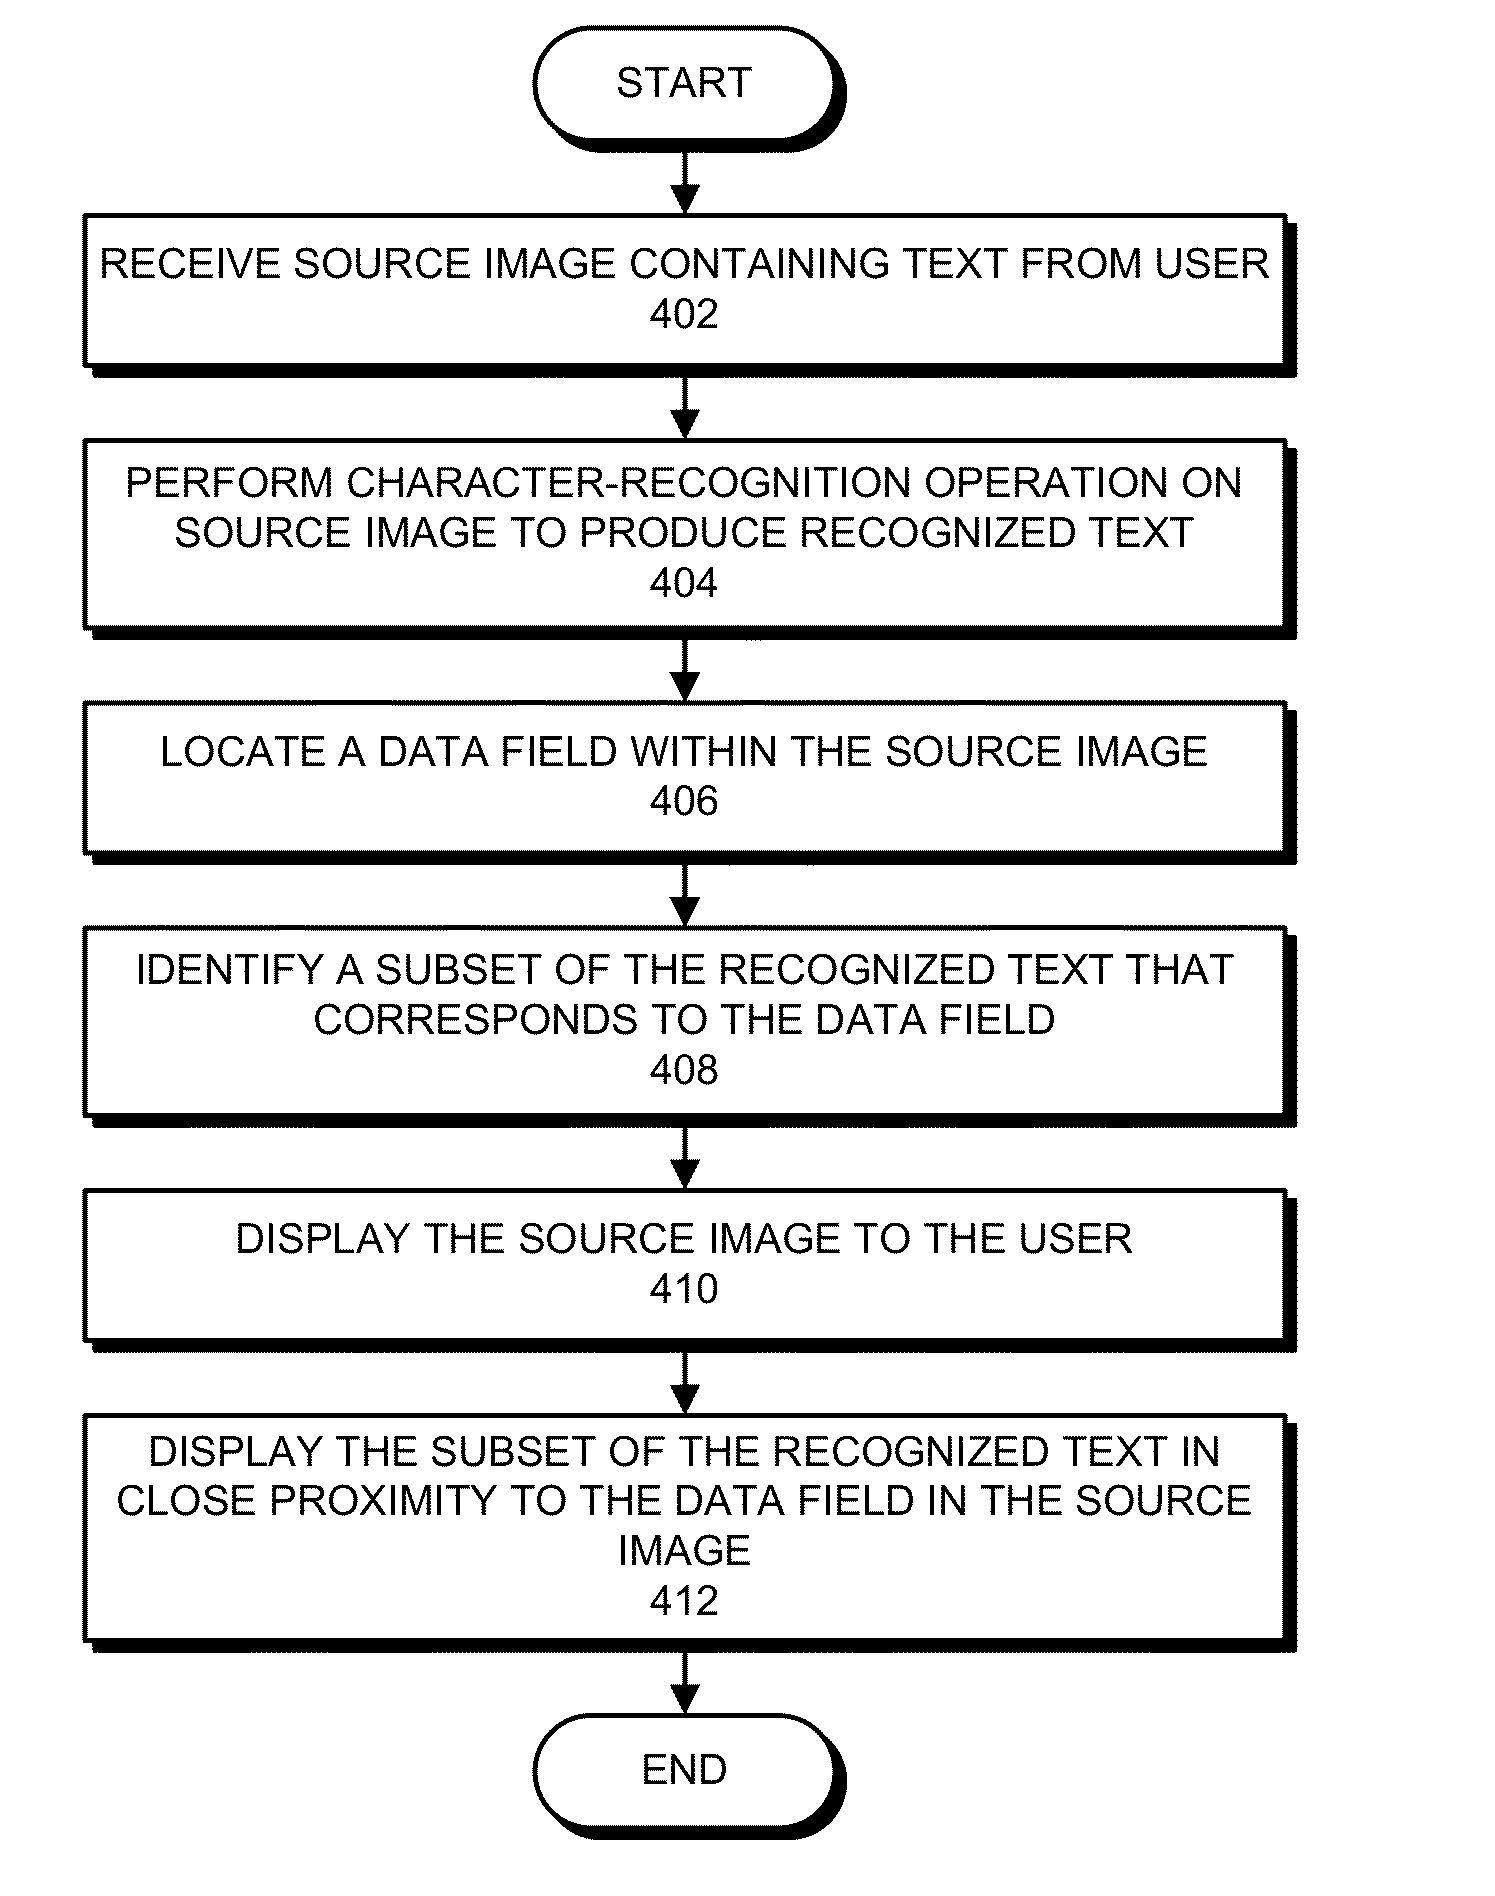 Displaying automatically recognized text in proximity to a source image to assist comparibility